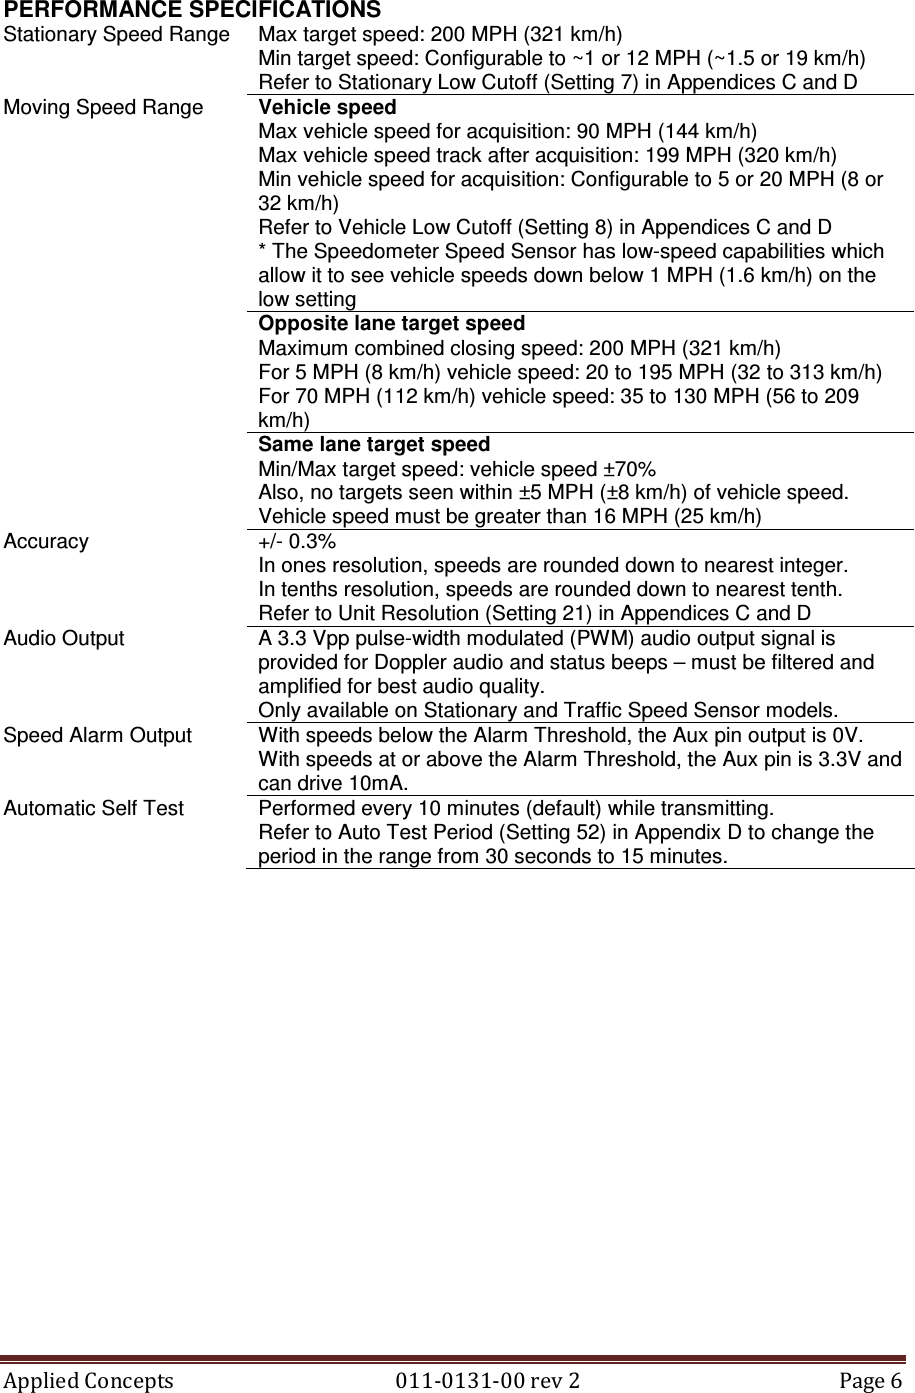 Applied Concepts                                            011-0131-00 rev 2  Page 6  PERFORMANCE SPECIFICATIONS Stationary Speed Range  Max target speed: 200 MPH (321 km/h) Min target speed: Configurable to ~1 or 12 MPH (~1.5 or 19 km/h) Refer to Stationary Low Cutoff (Setting 7) in Appendices C and D Vehicle speed Max vehicle speed for acquisition: 90 MPH (144 km/h) Max vehicle speed track after acquisition: 199 MPH (320 km/h) Min vehicle speed for acquisition: Configurable to 5 or 20 MPH (8 or 32 km/h) Refer to Vehicle Low Cutoff (Setting 8) in Appendices C and D * The Speedometer Speed Sensor has low-speed capabilities which allow it to see vehicle speeds down below 1 MPH (1.6 km/h) on the low setting Opposite lane target speed Maximum combined closing speed: 200 MPH (321 km/h) For 5 MPH (8 km/h) vehicle speed: 20 to 195 MPH (32 to 313 km/h) For 70 MPH (112 km/h) vehicle speed: 35 to 130 MPH (56 to 209 km/h) Moving Speed Range Same lane target speed Min/Max target speed: vehicle speed ±70% Also, no targets seen within ±5 MPH (±8 km/h) of vehicle speed. Vehicle speed must be greater than 16 MPH (25 km/h) Accuracy  +/- 0.3% In ones resolution, speeds are rounded down to nearest integer. In tenths resolution, speeds are rounded down to nearest tenth. Refer to Unit Resolution (Setting 21) in Appendices C and D Audio Output  A 3.3 Vpp pulse-width modulated (PWM) audio output signal is provided for Doppler audio and status beeps – must be filtered and amplified for best audio quality. Only available on Stationary and Traffic Speed Sensor models. Speed Alarm Output  With speeds below the Alarm Threshold, the Aux pin output is 0V. With speeds at or above the Alarm Threshold, the Aux pin is 3.3V and can drive 10mA. Automatic Self Test  Performed every 10 minutes (default) while transmitting. Refer to Auto Test Period (Setting 52) in Appendix D to change the period in the range from 30 seconds to 15 minutes.         